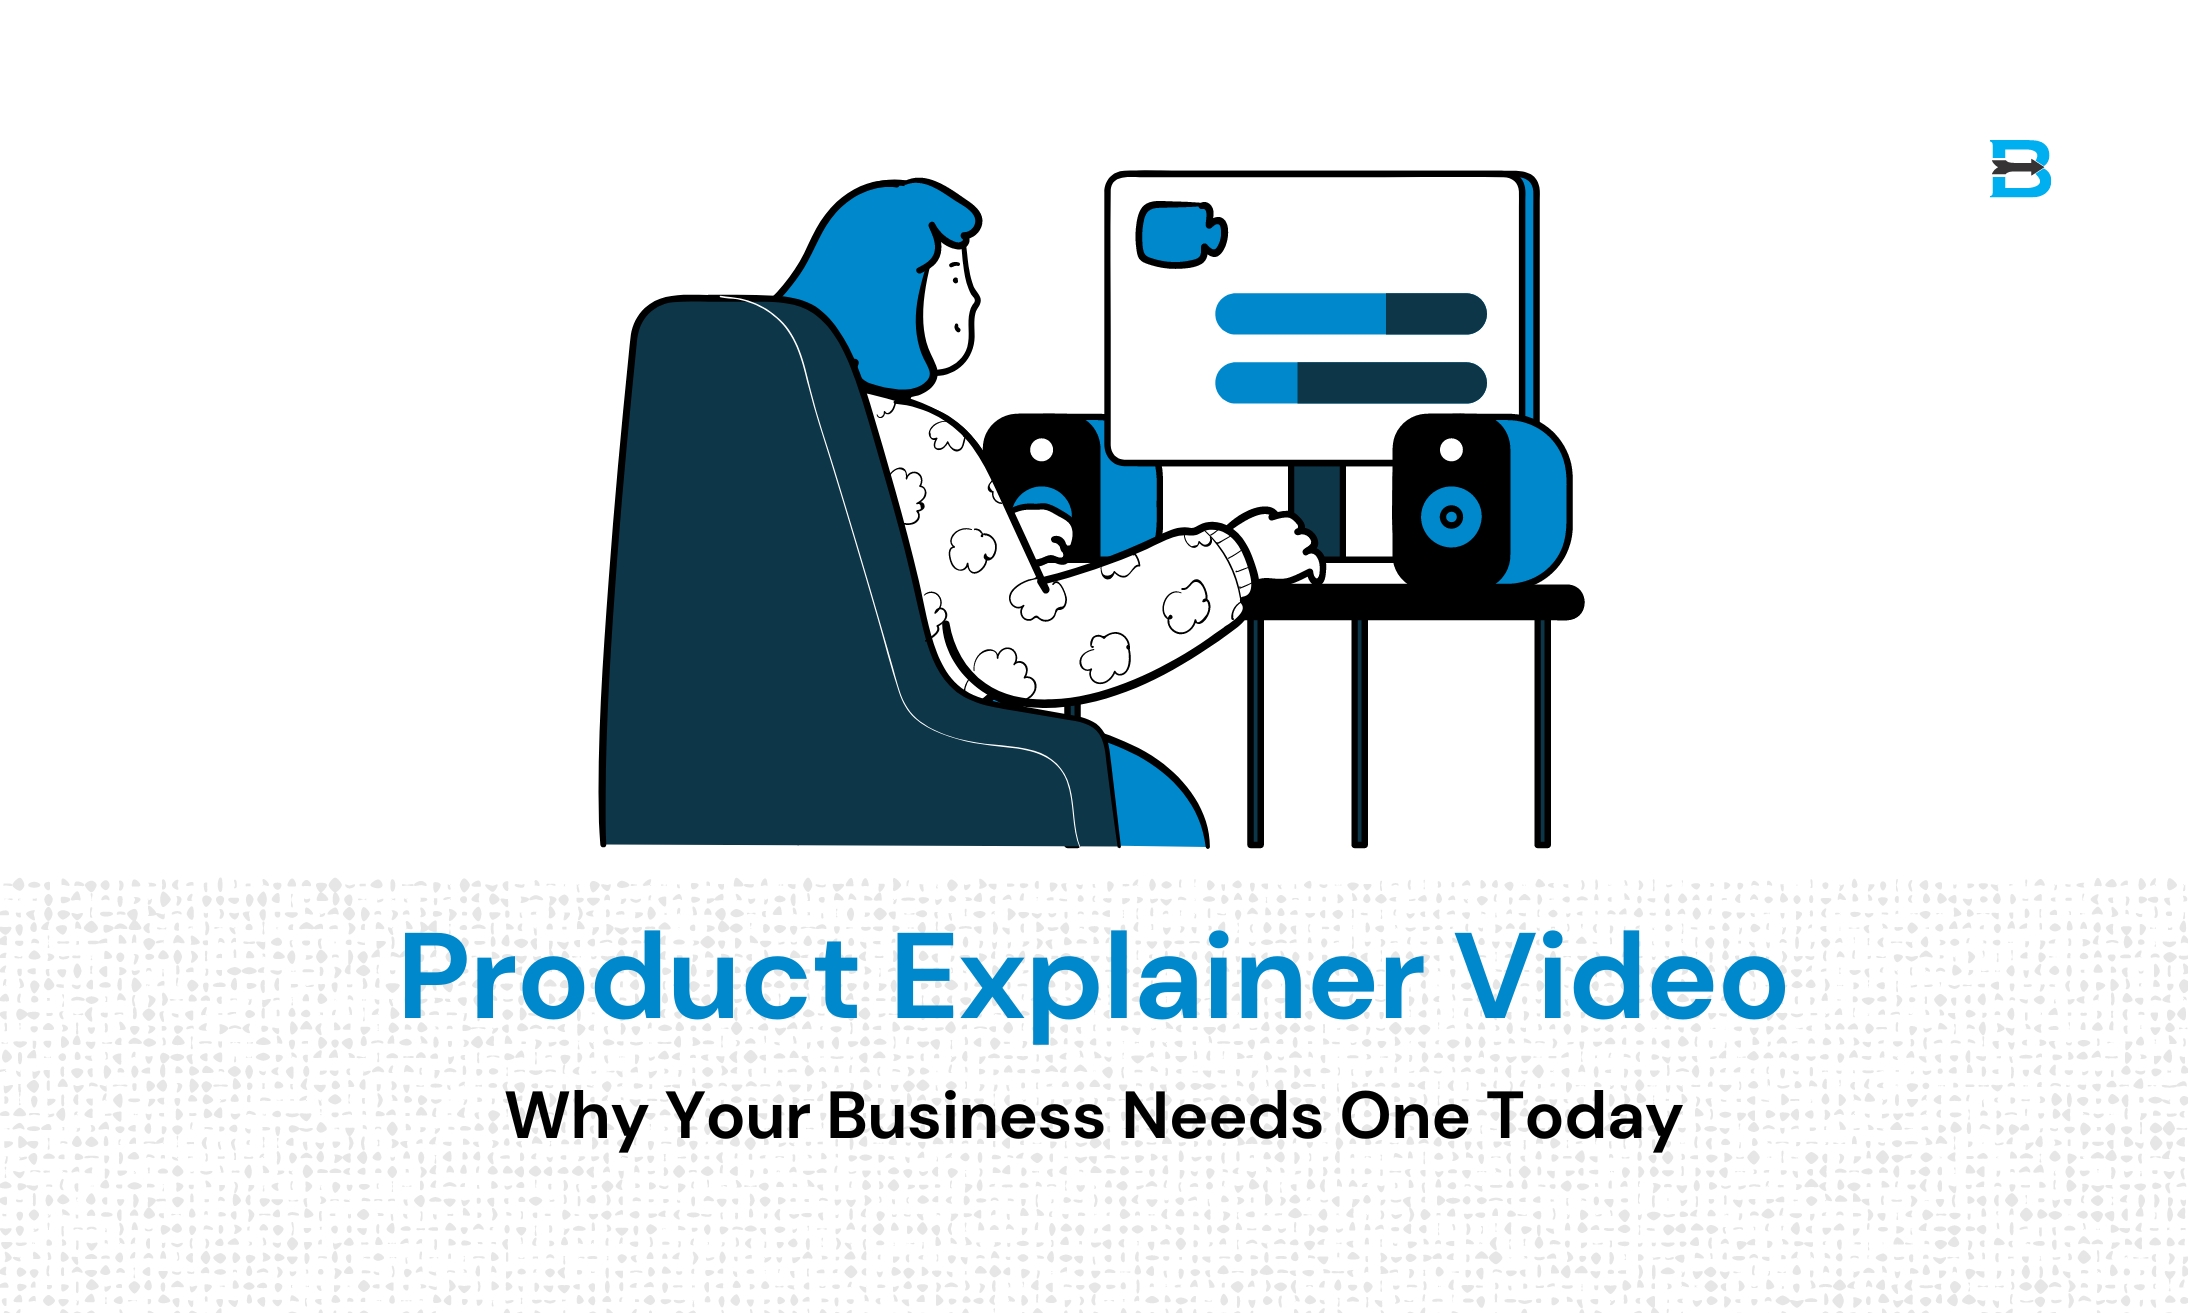 Product Explainer Video Why Your Business Needs One Today